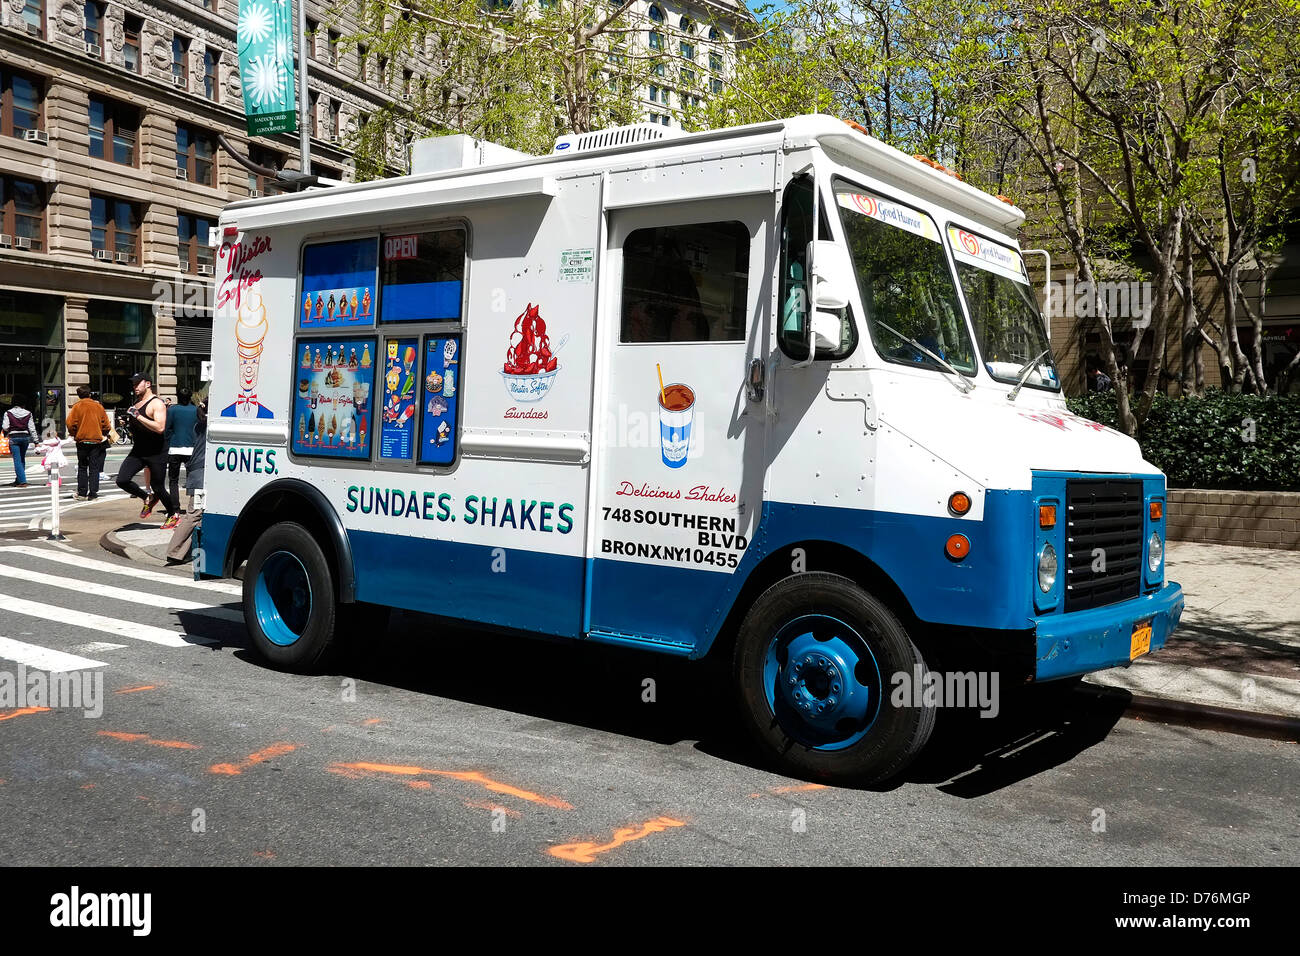 A Mister Softee ice cream truck parked on a street in Manhattan, New York City. Stock Photo